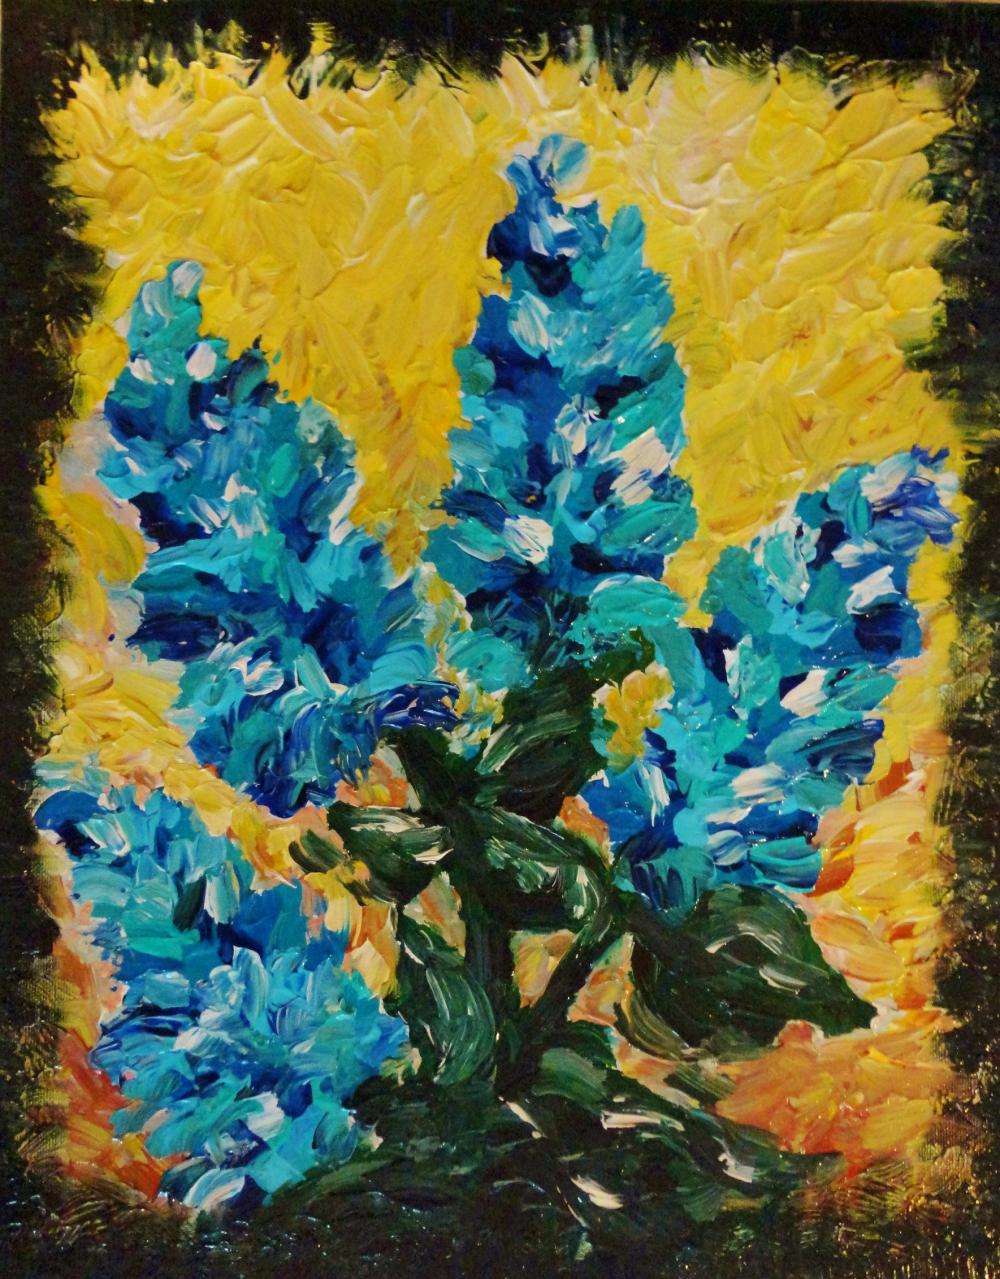 Original Ooak Painting Blue Shades Of Bloom Abstract Impasto Floral Acrylic Modern Art 16 X 20 Beautiful Turquoise Green Yellow